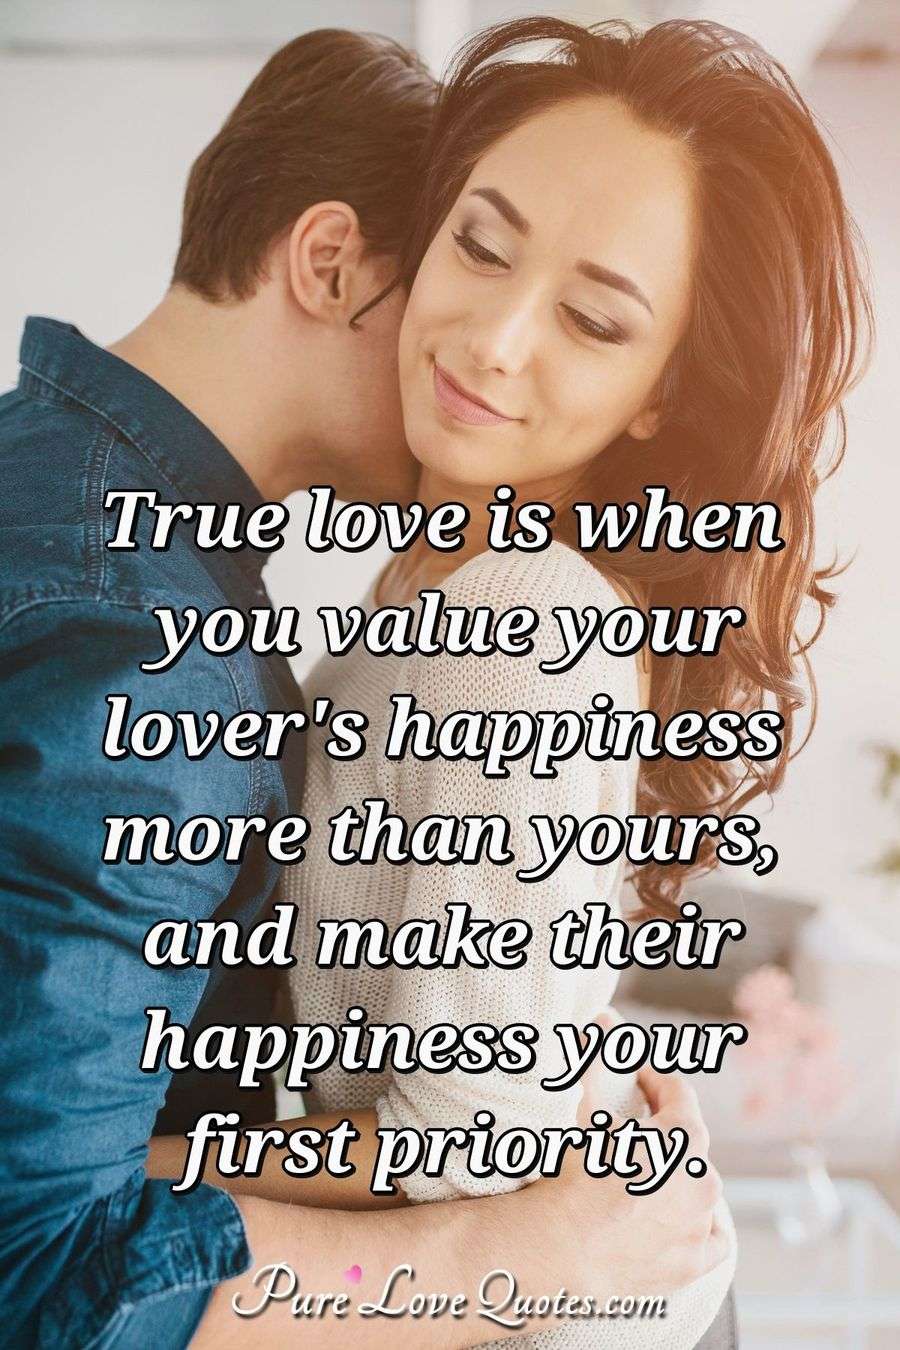 True love is when you value your lover's happiness more than yours, and